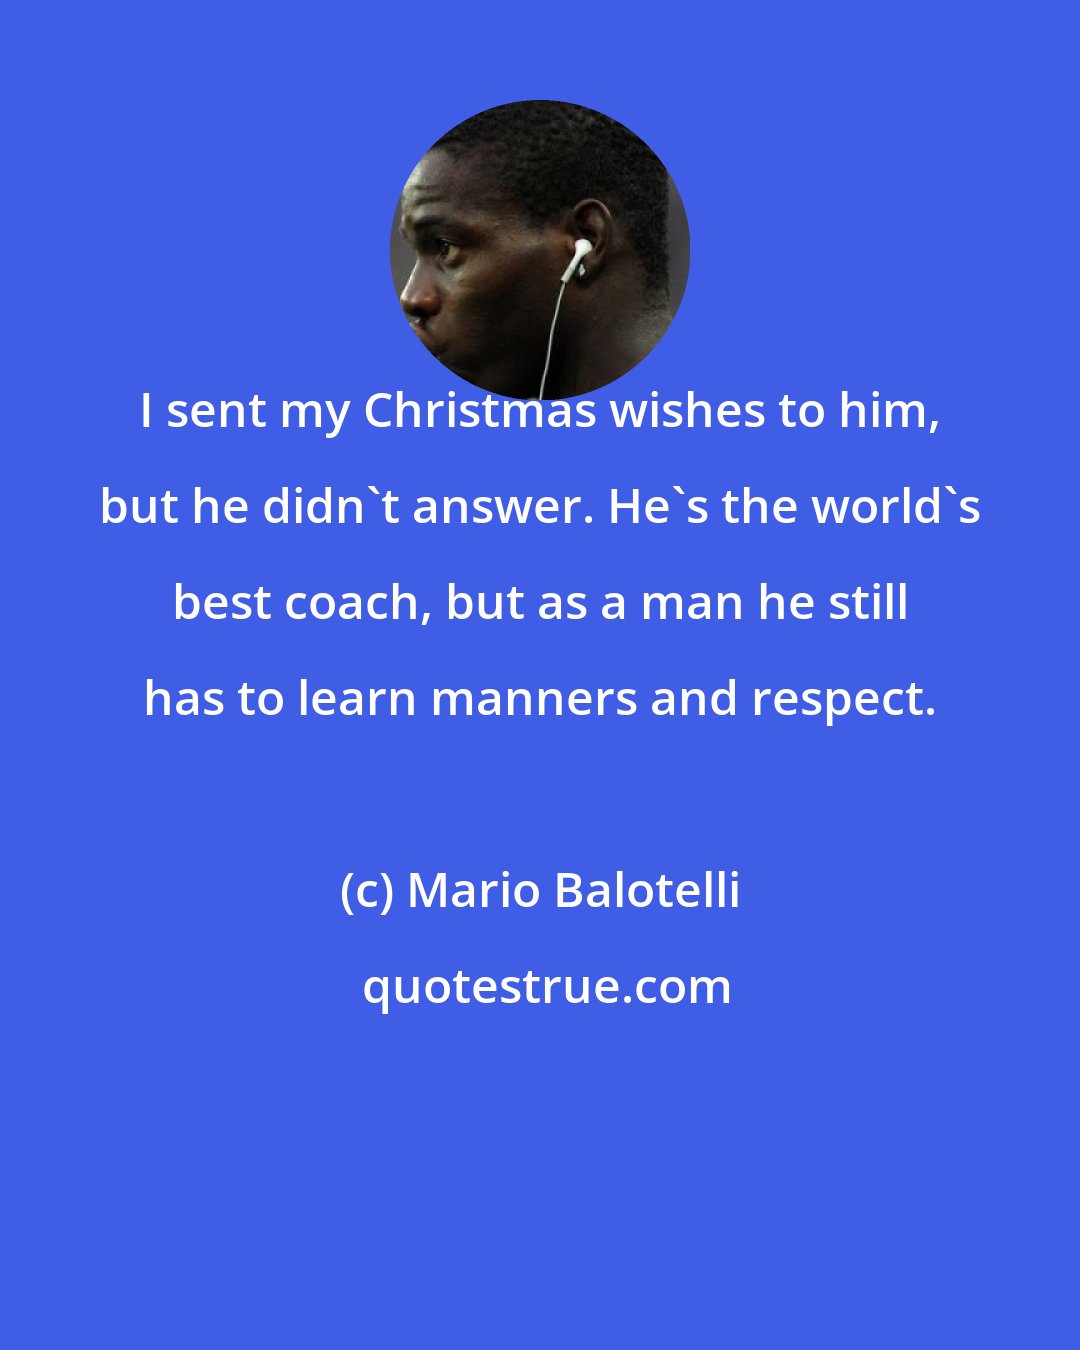 Mario Balotelli: I sent my Christmas wishes to him, but he didn't answer. He's the world's best coach, but as a man he still has to learn manners and respect.